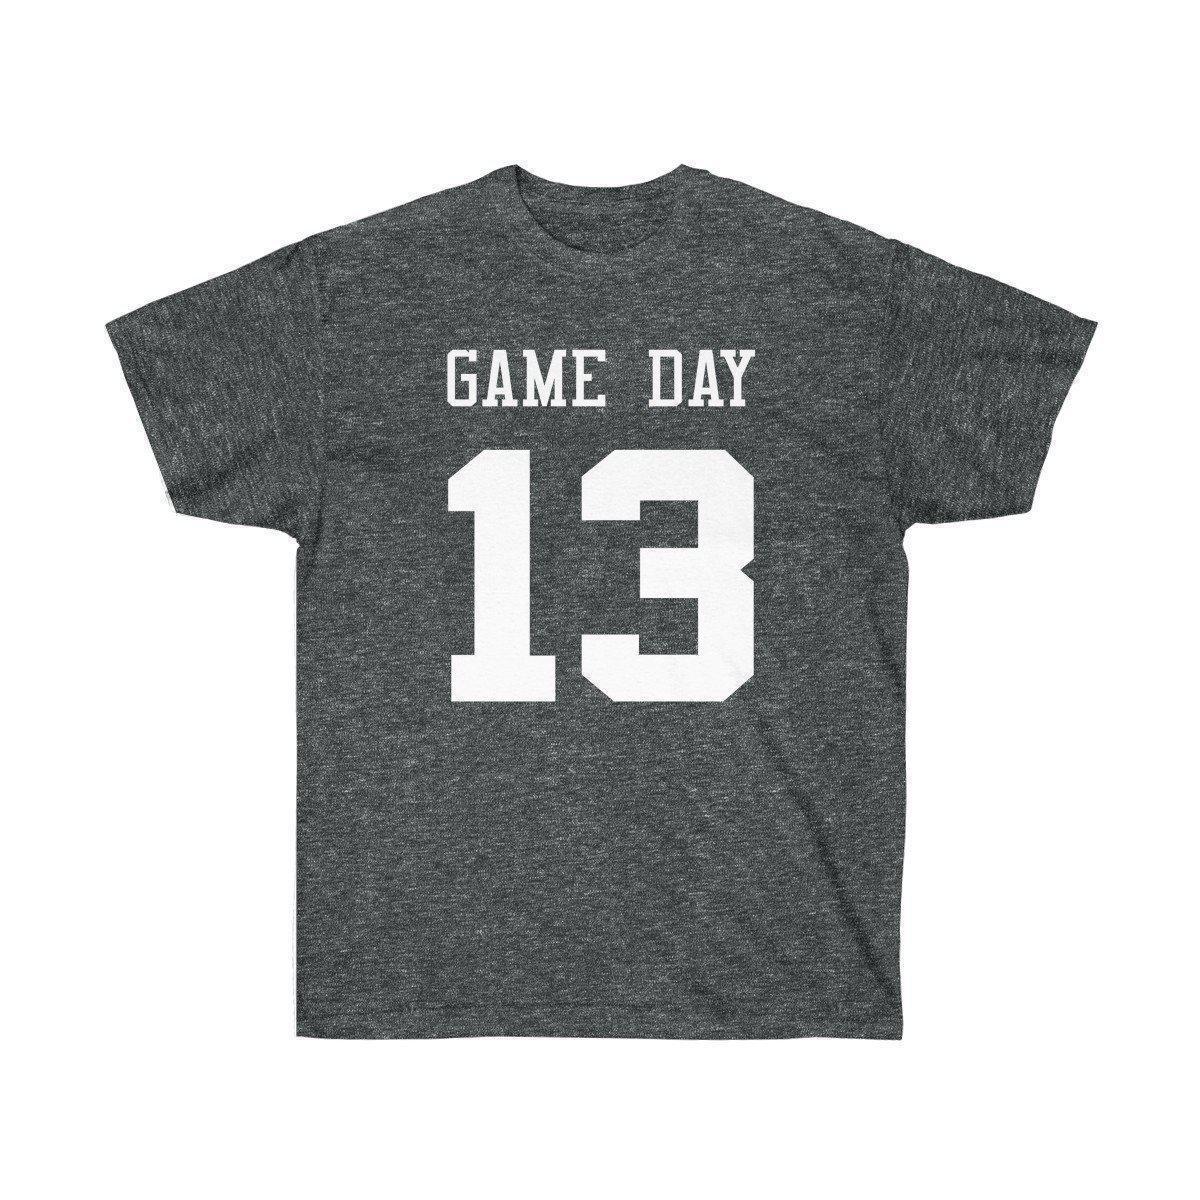 Game Day Tee - Sports T-shirt for Football, Basket, Soccer games-Dark Heather-S-Archethype